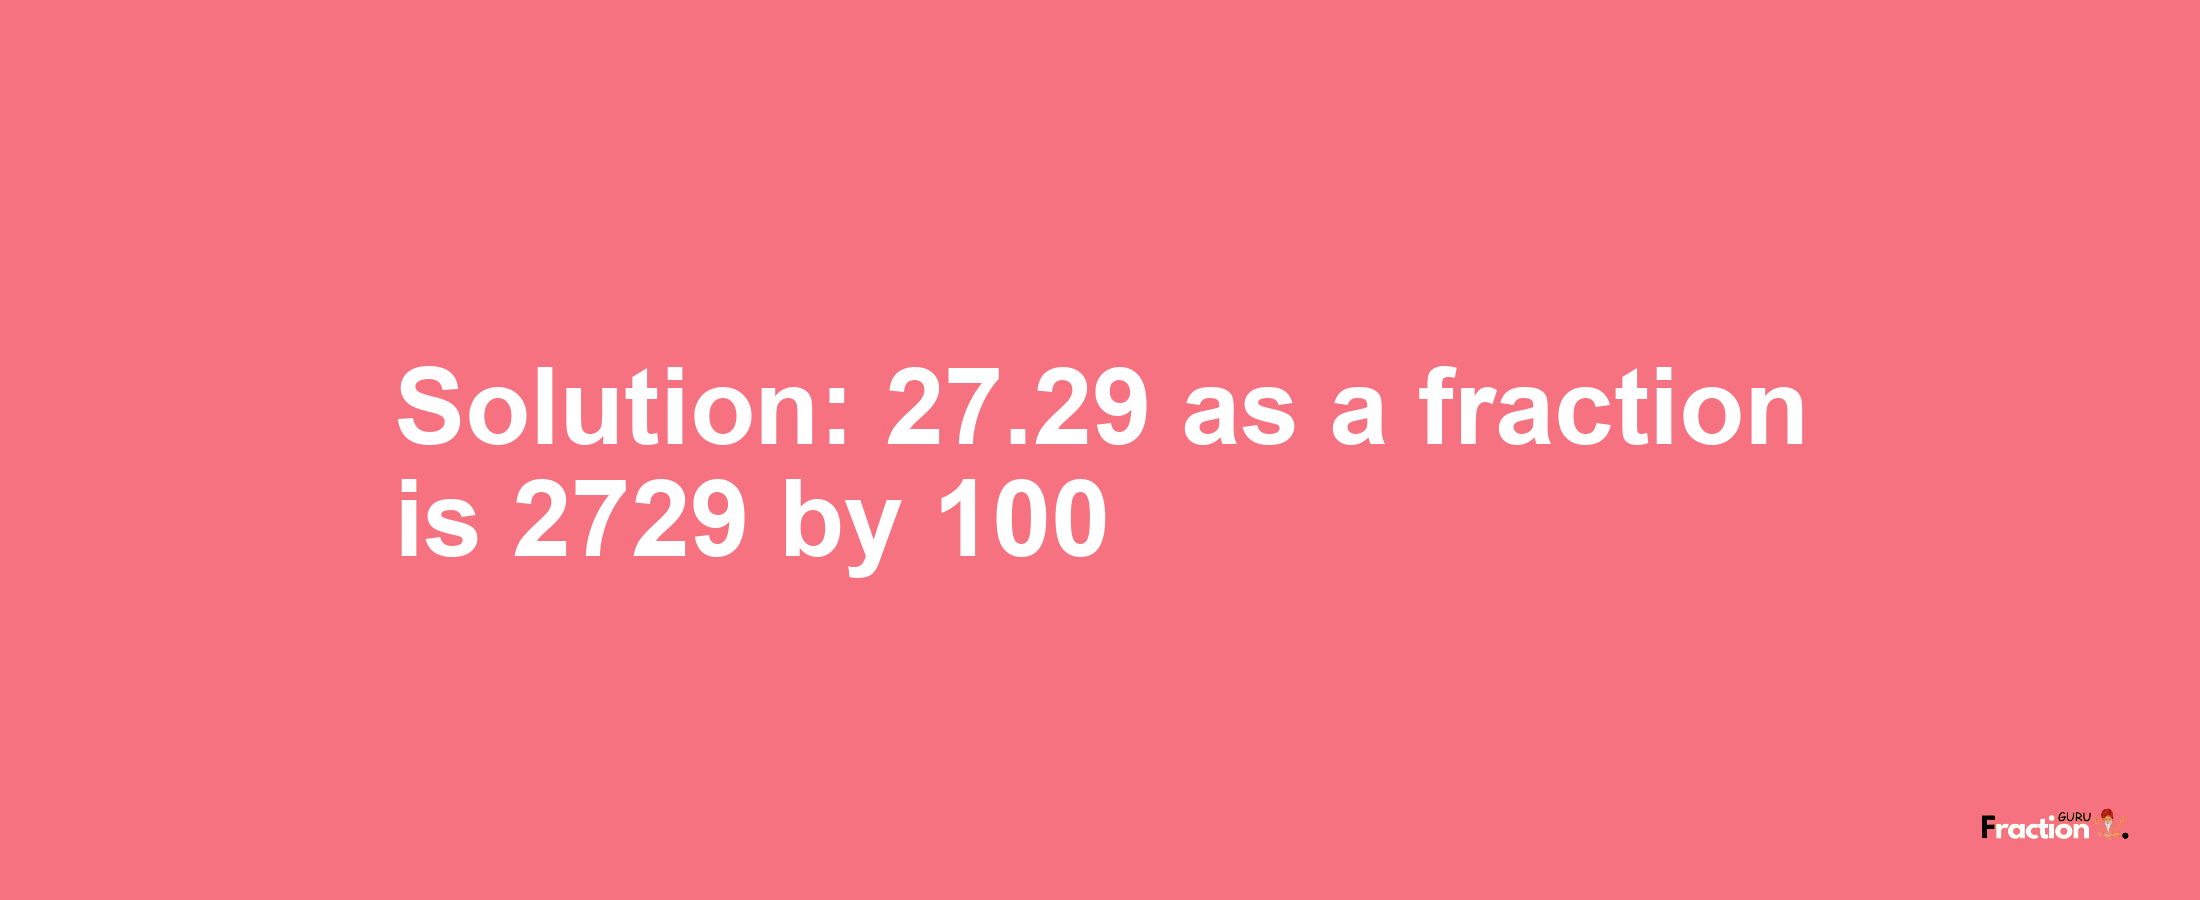 Solution:27.29 as a fraction is 2729/100